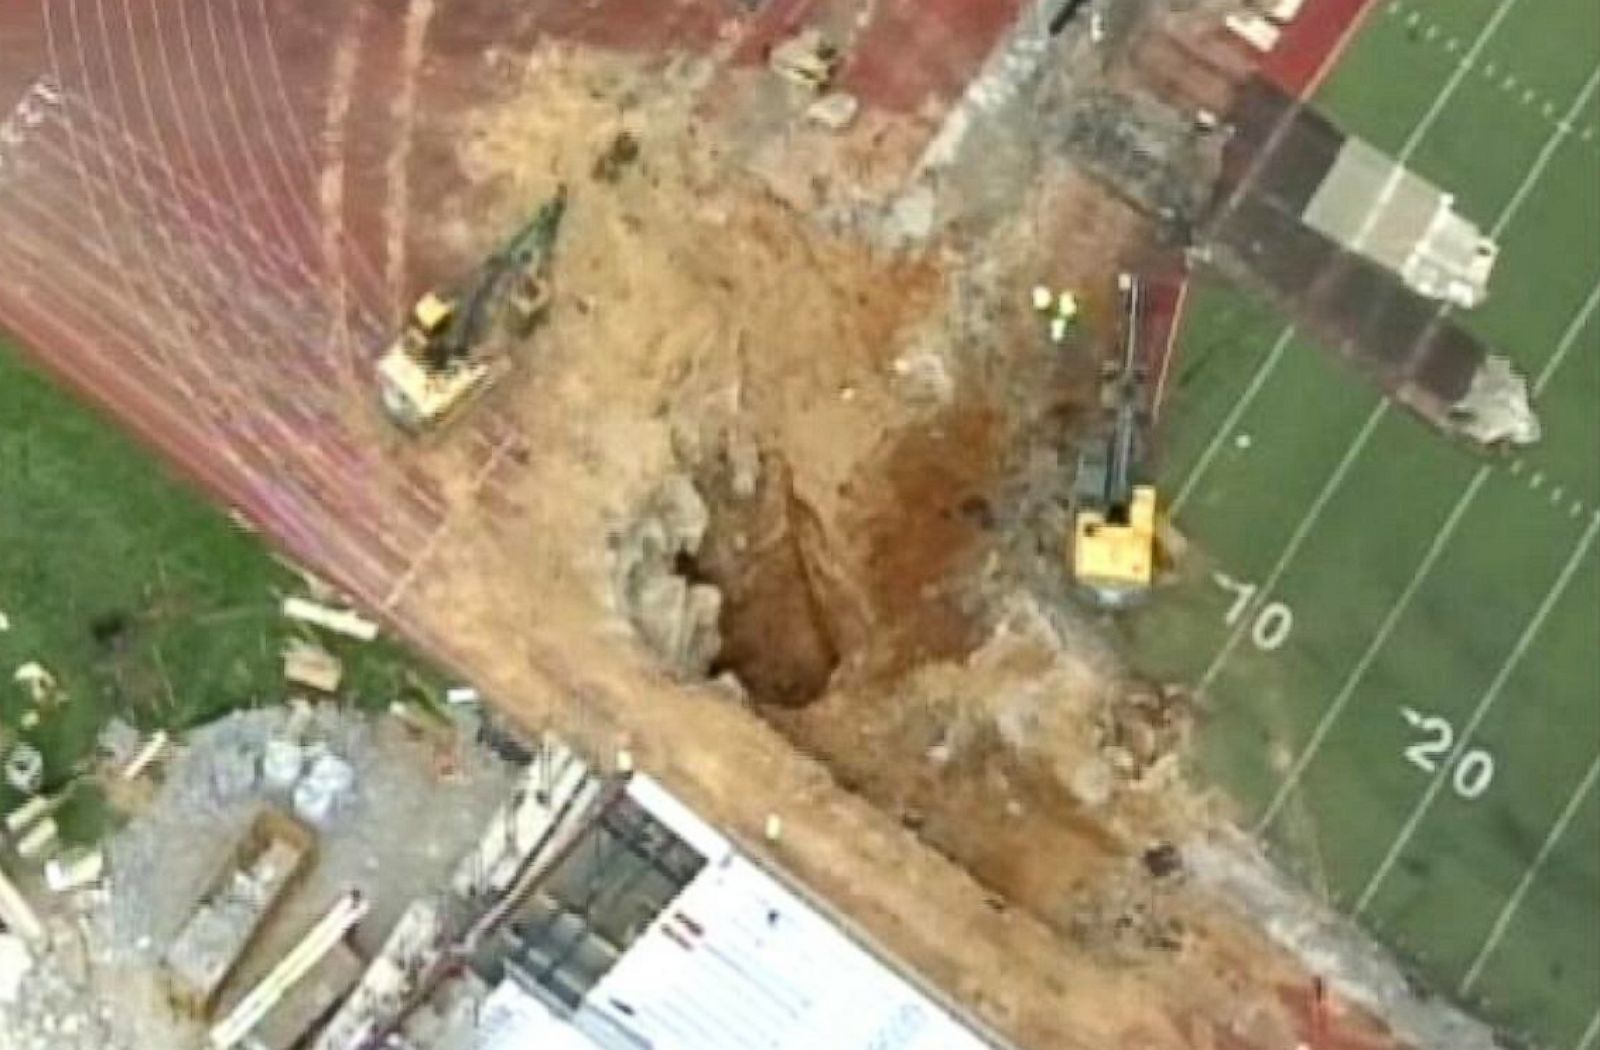 St Louis Sinkhole Swallows A Car Picture Incredible Sinkholes Around